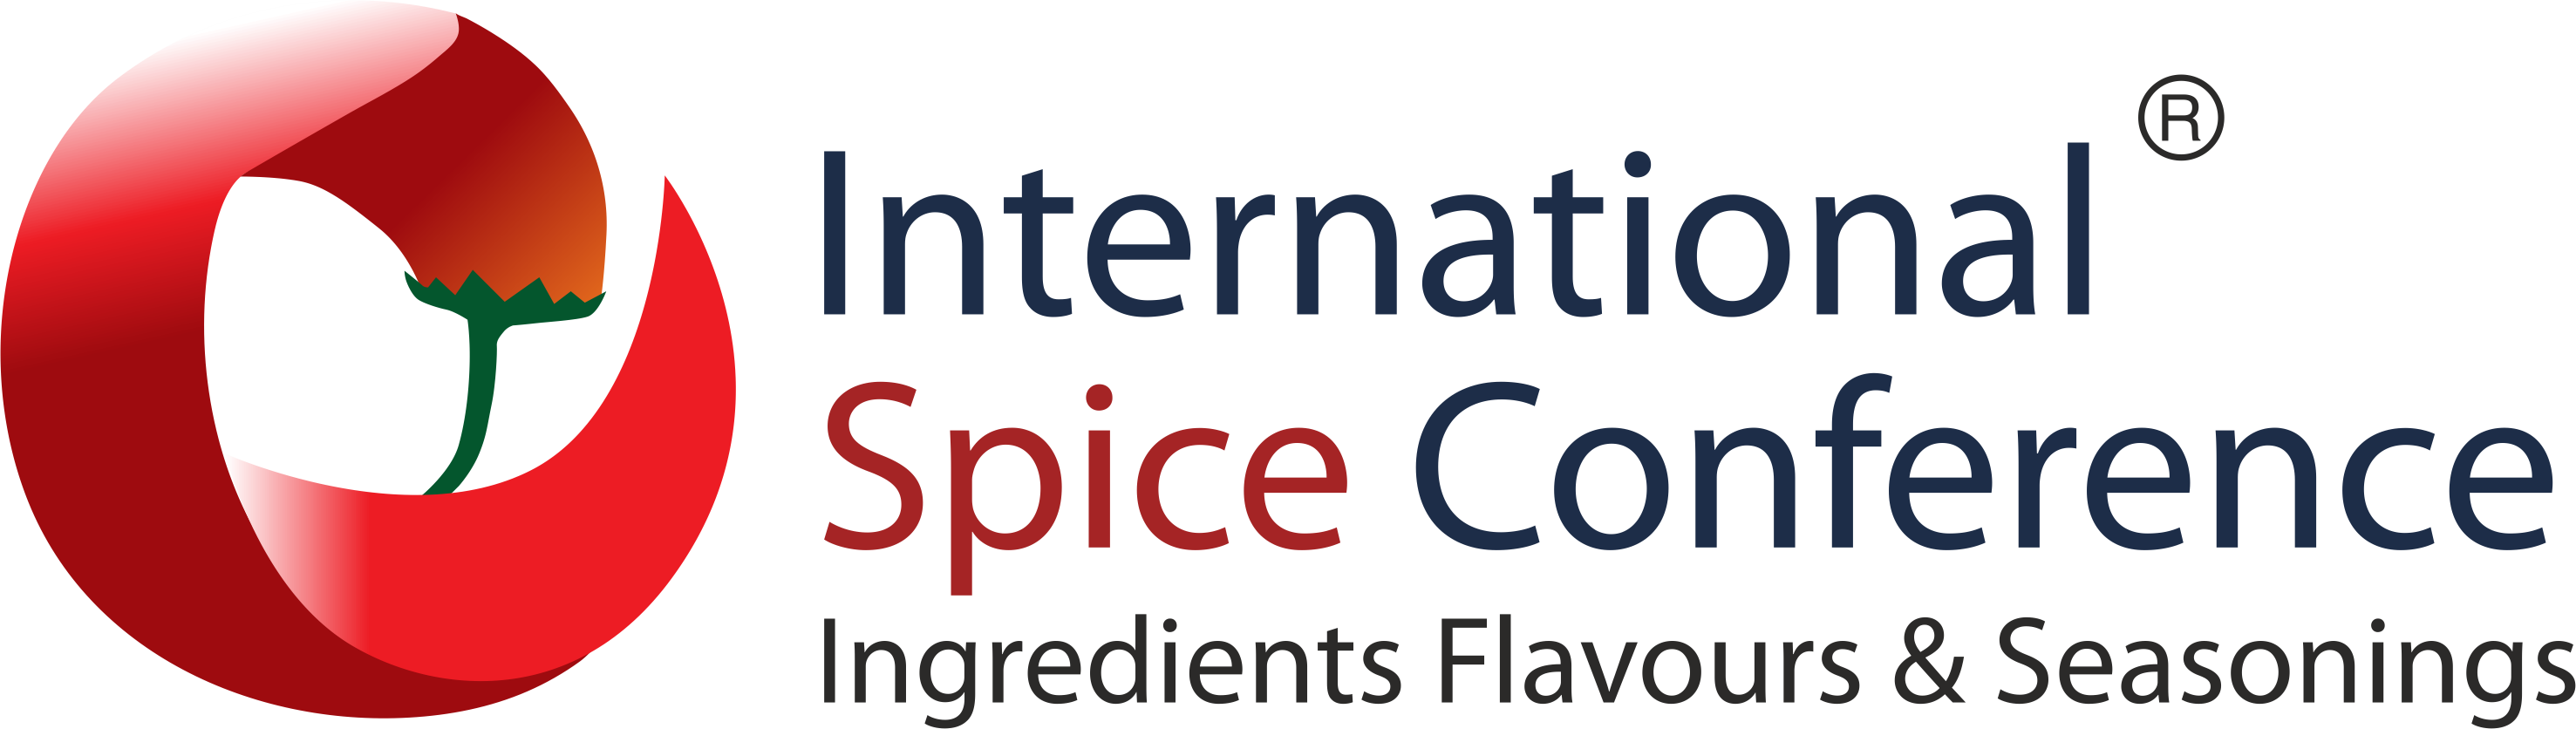 SPICE CONFERENCE